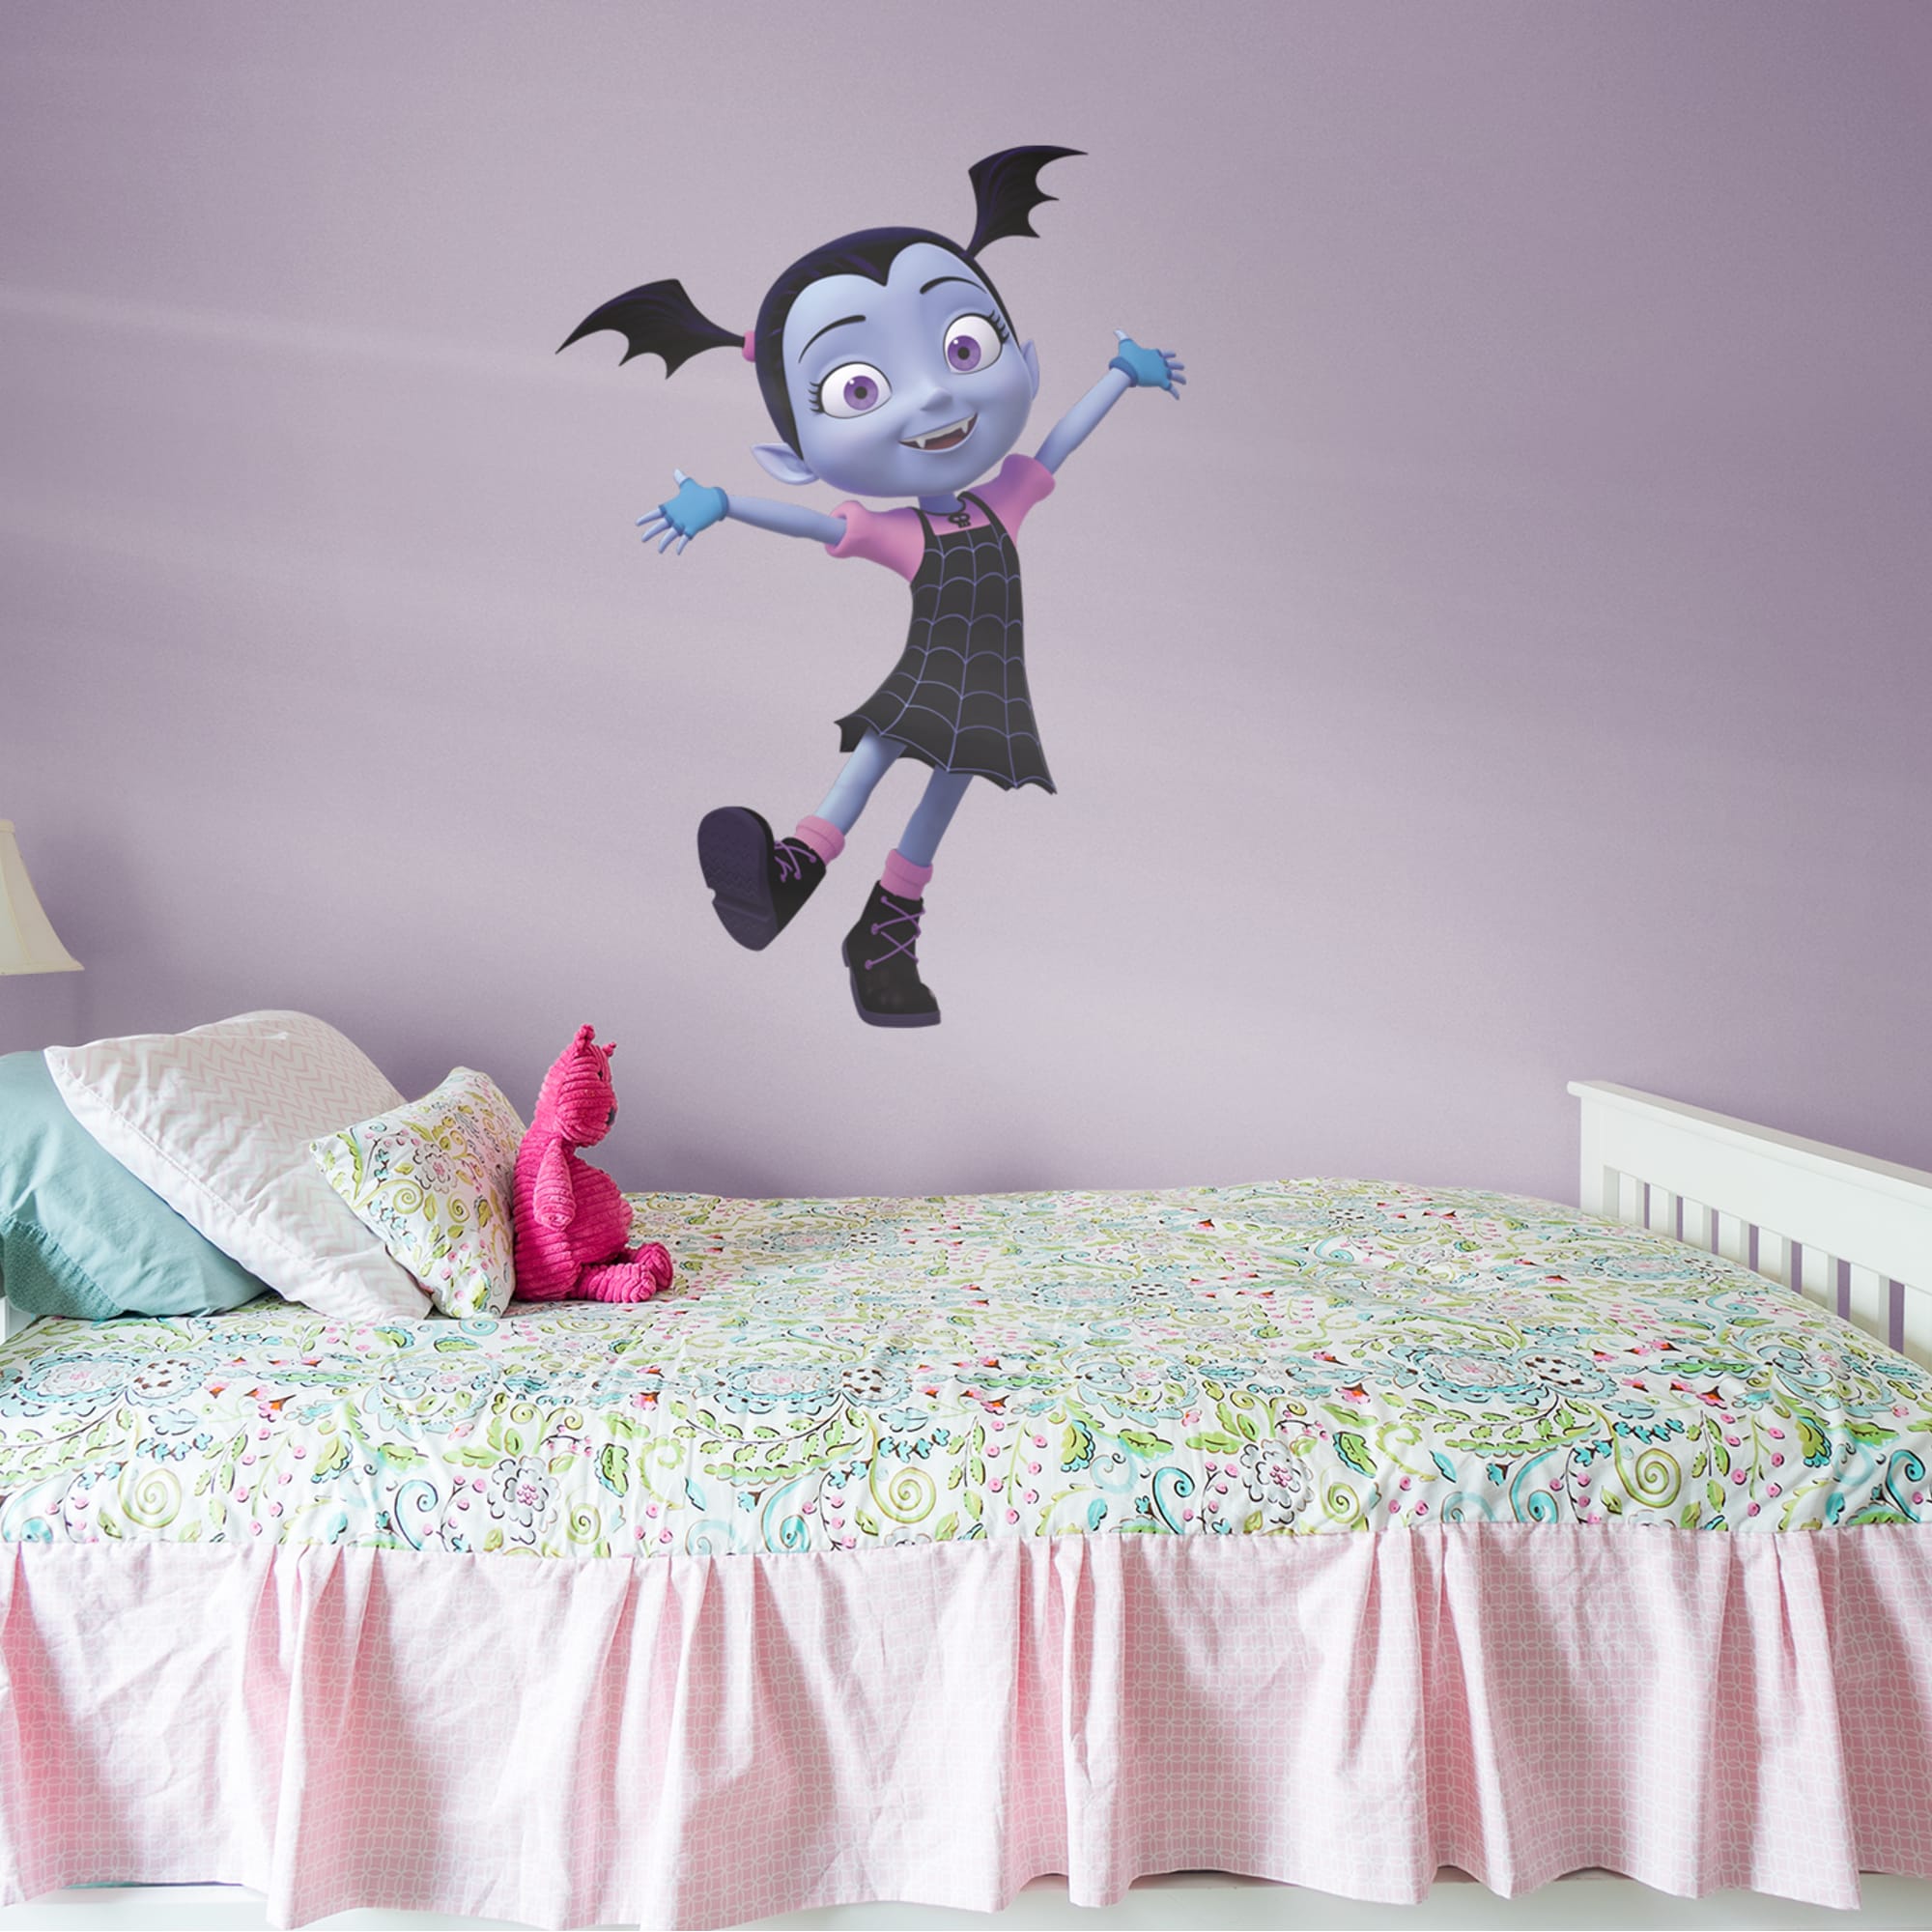 Vampirina - Officially Licensed Disney Removable Wall Decal 36.0"W x 50.0"H by Fathead | Vinyl